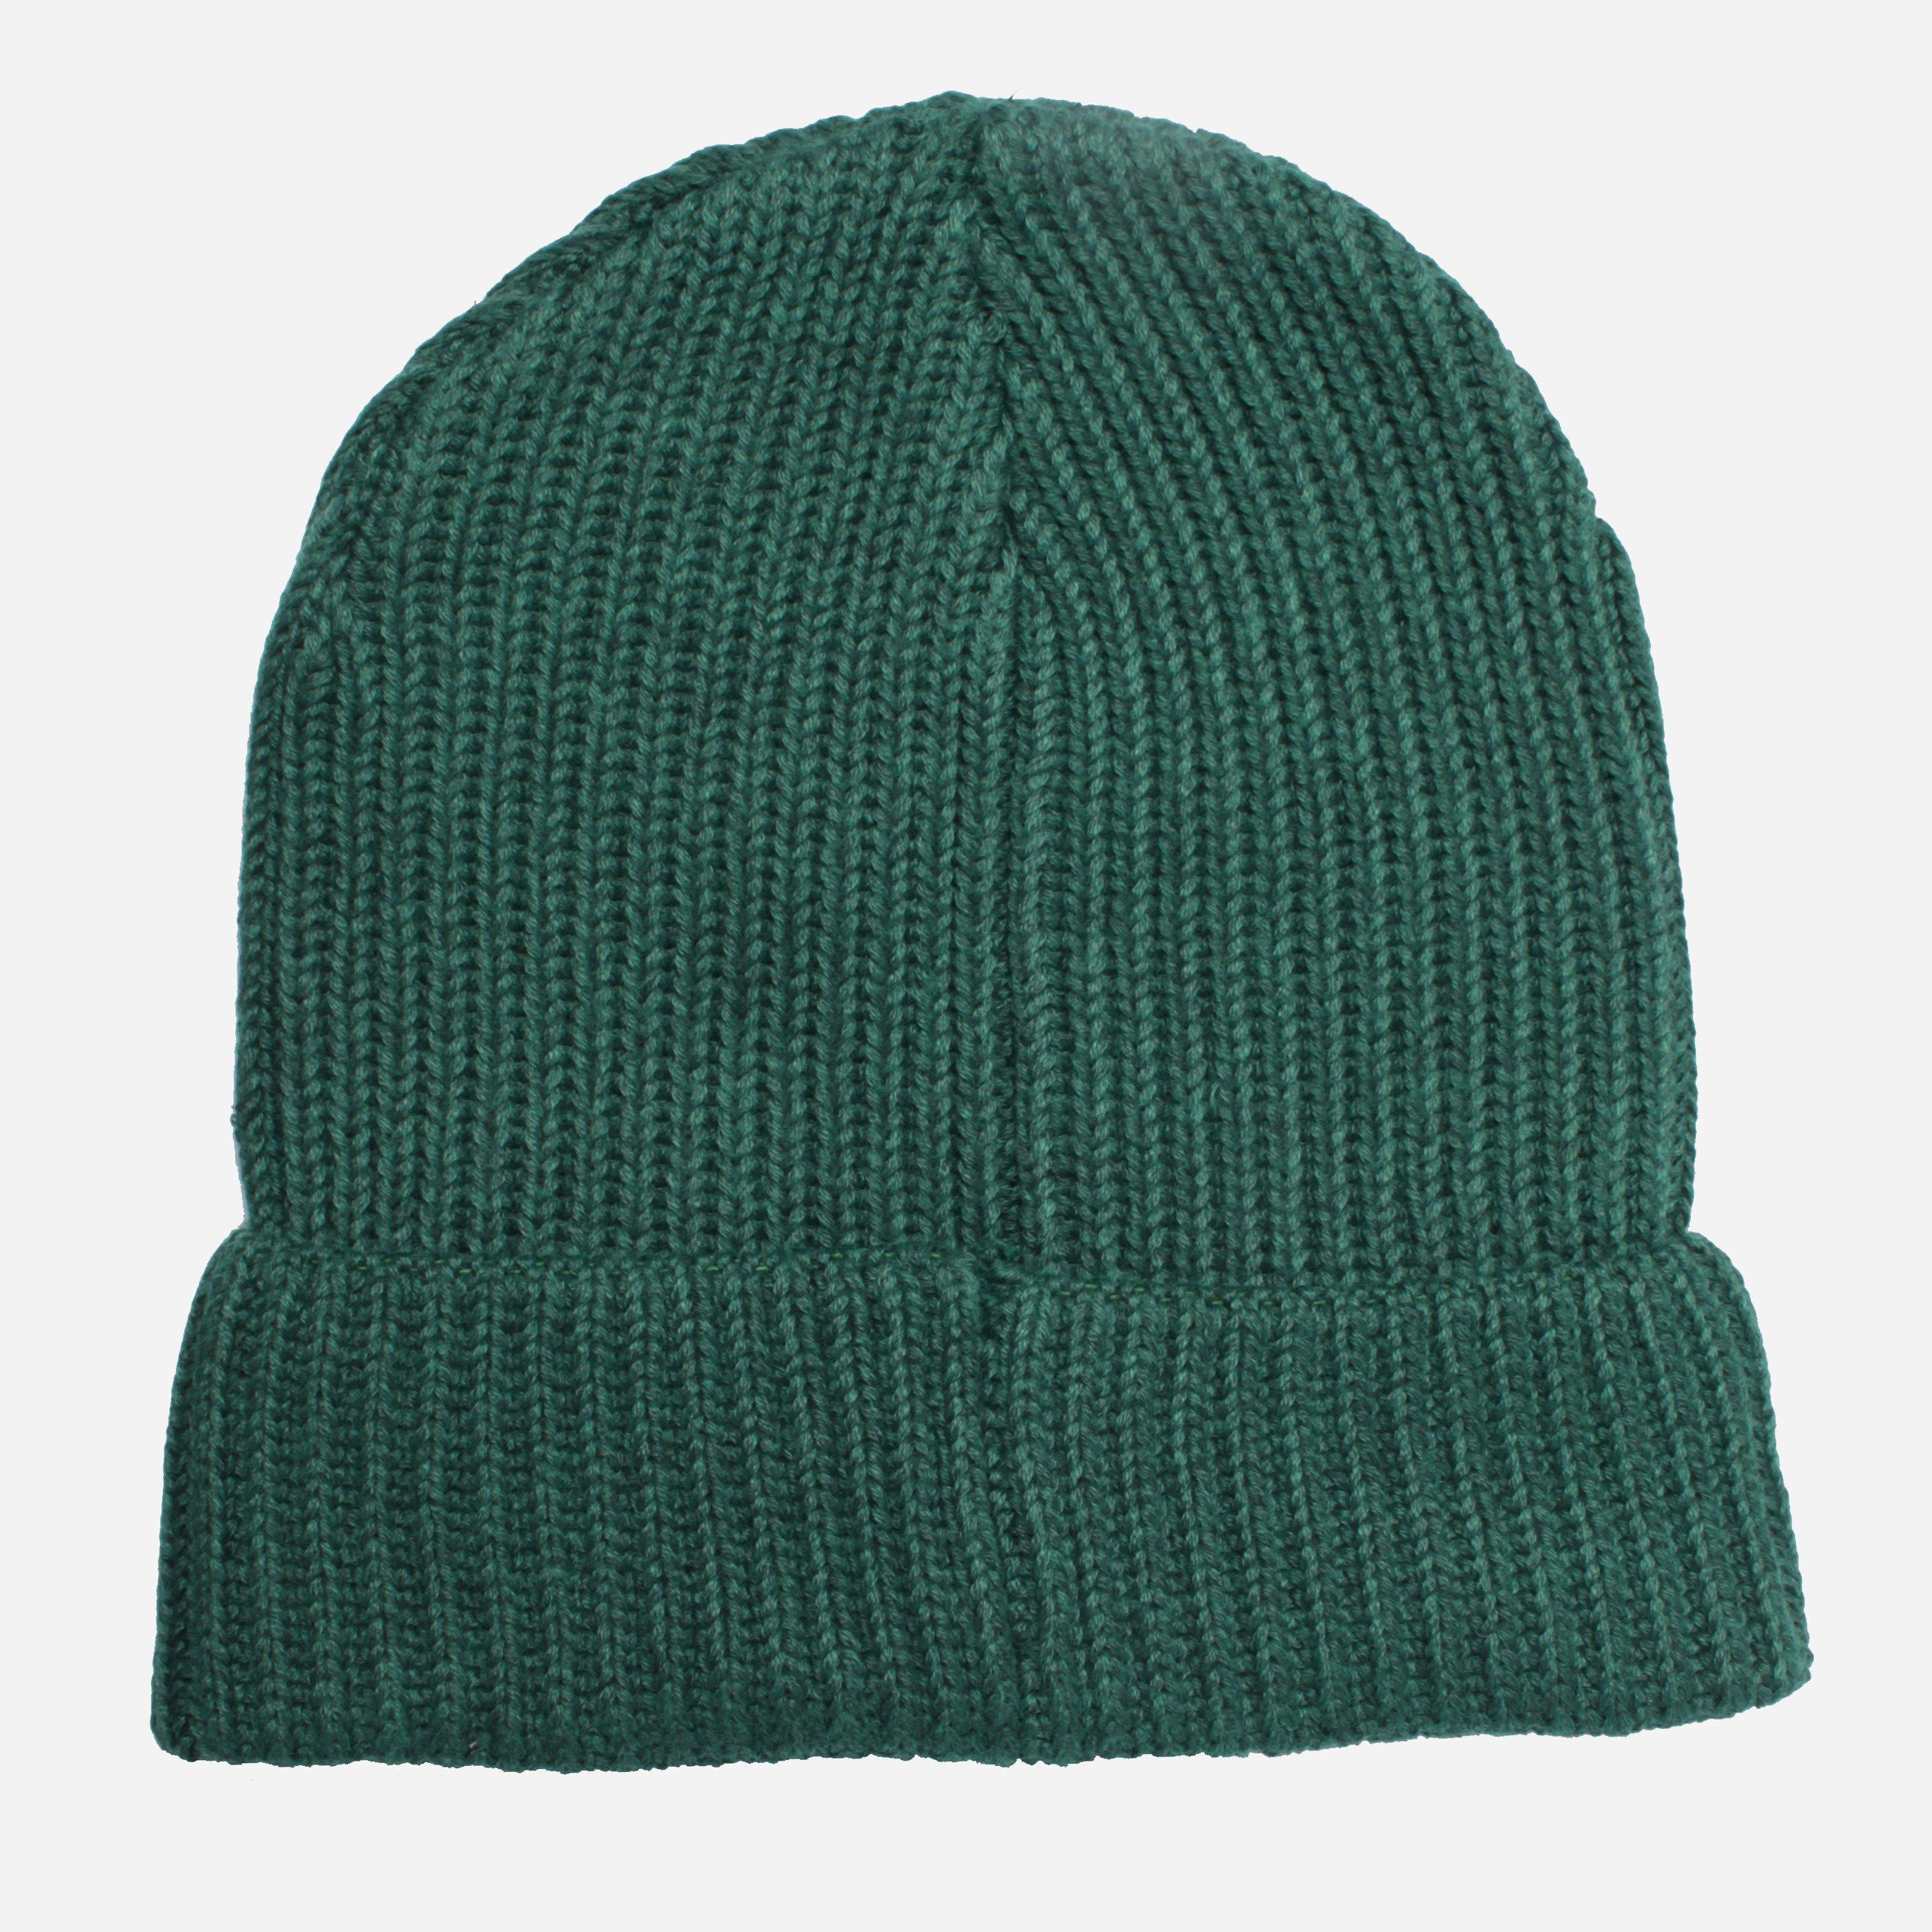 Patagonia Synthetic Fisherman's Rolled Beanie Hat in Green for Men - Lyst